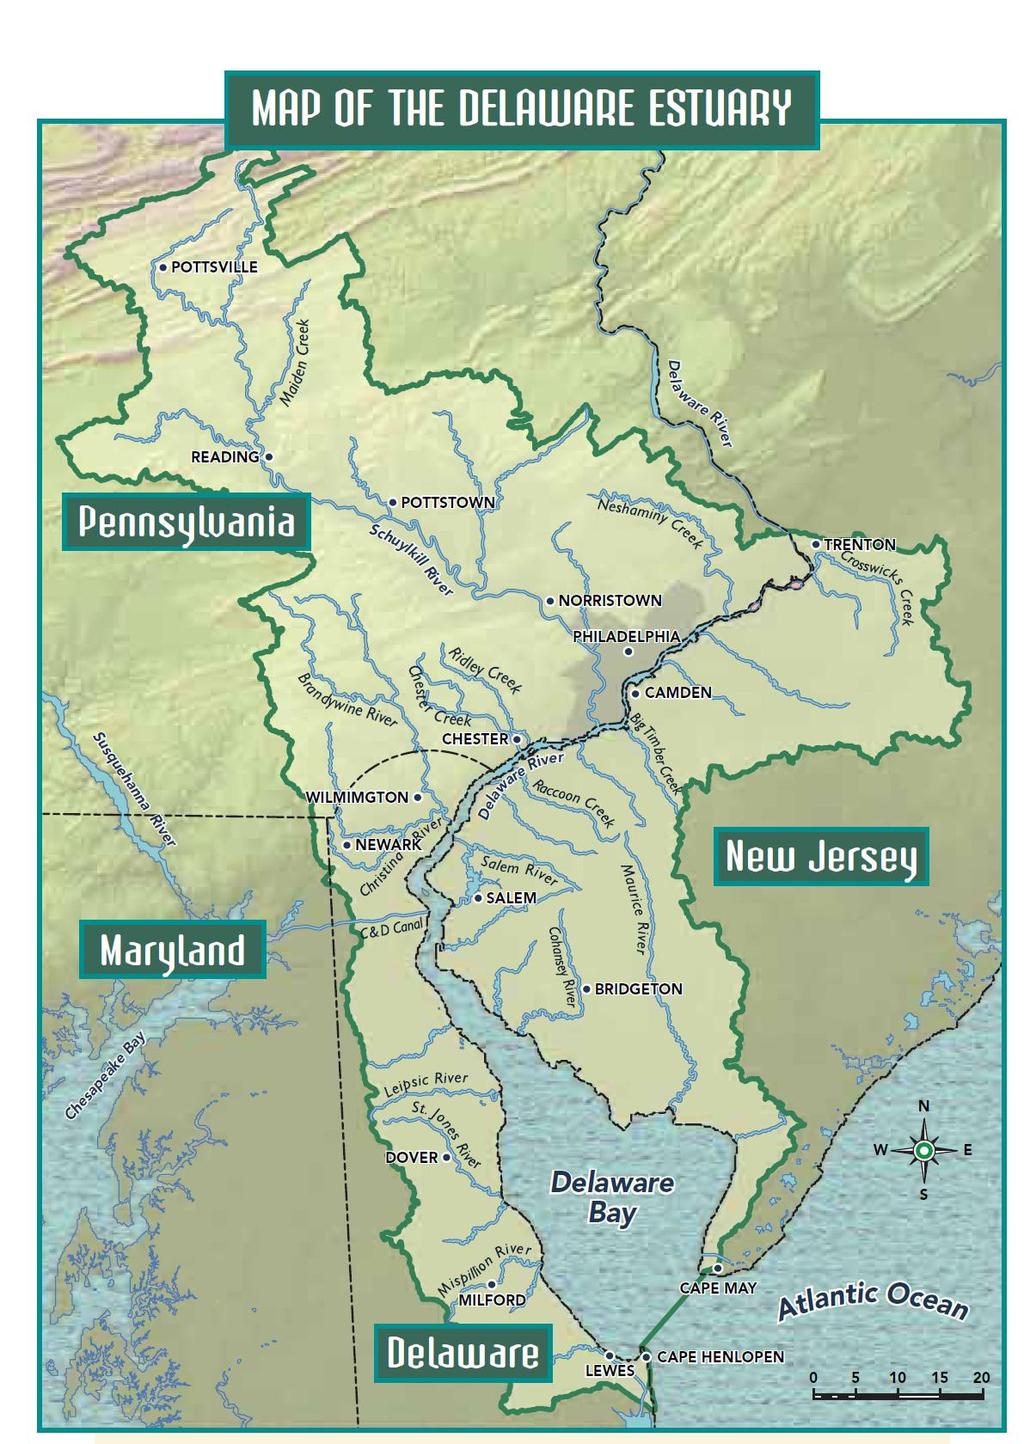 Enormous watershed nearly 6,500 square miles Historically home to 12-14 freshwater mussel species but only